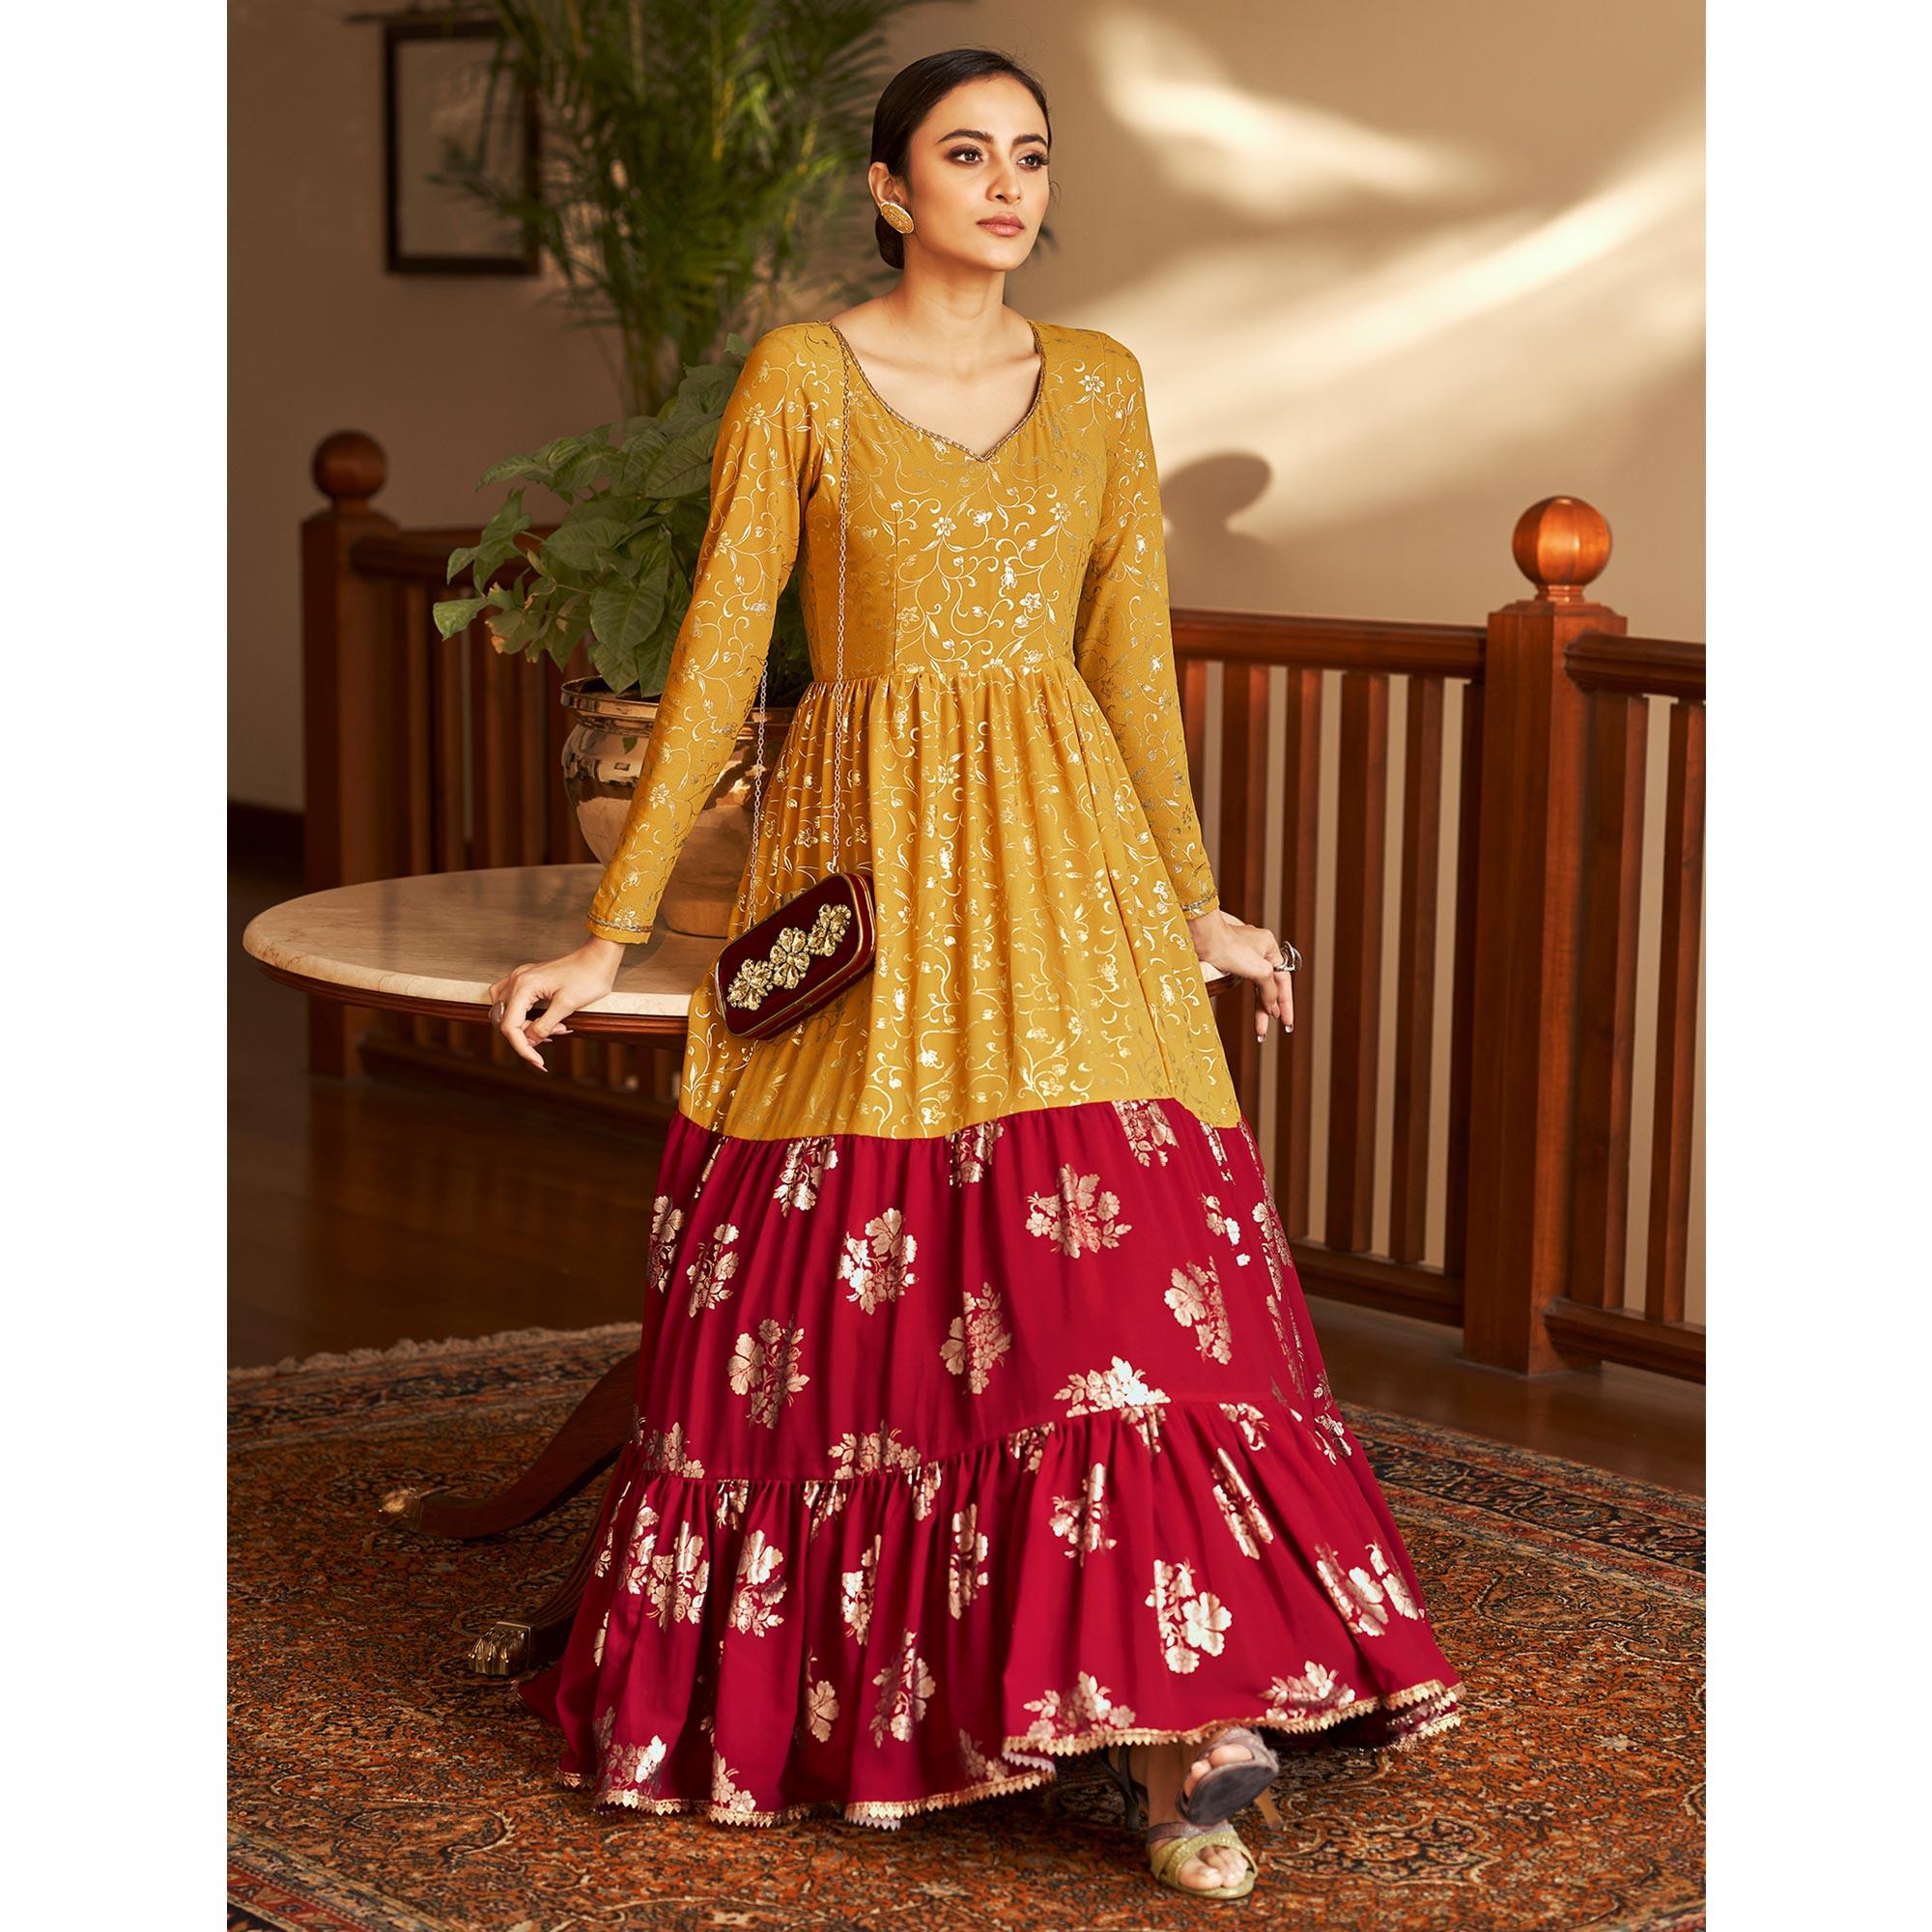 Party Wear Gowns - Buy Party Wear Gowns Online Starting at Just ₹224 |  Meesho